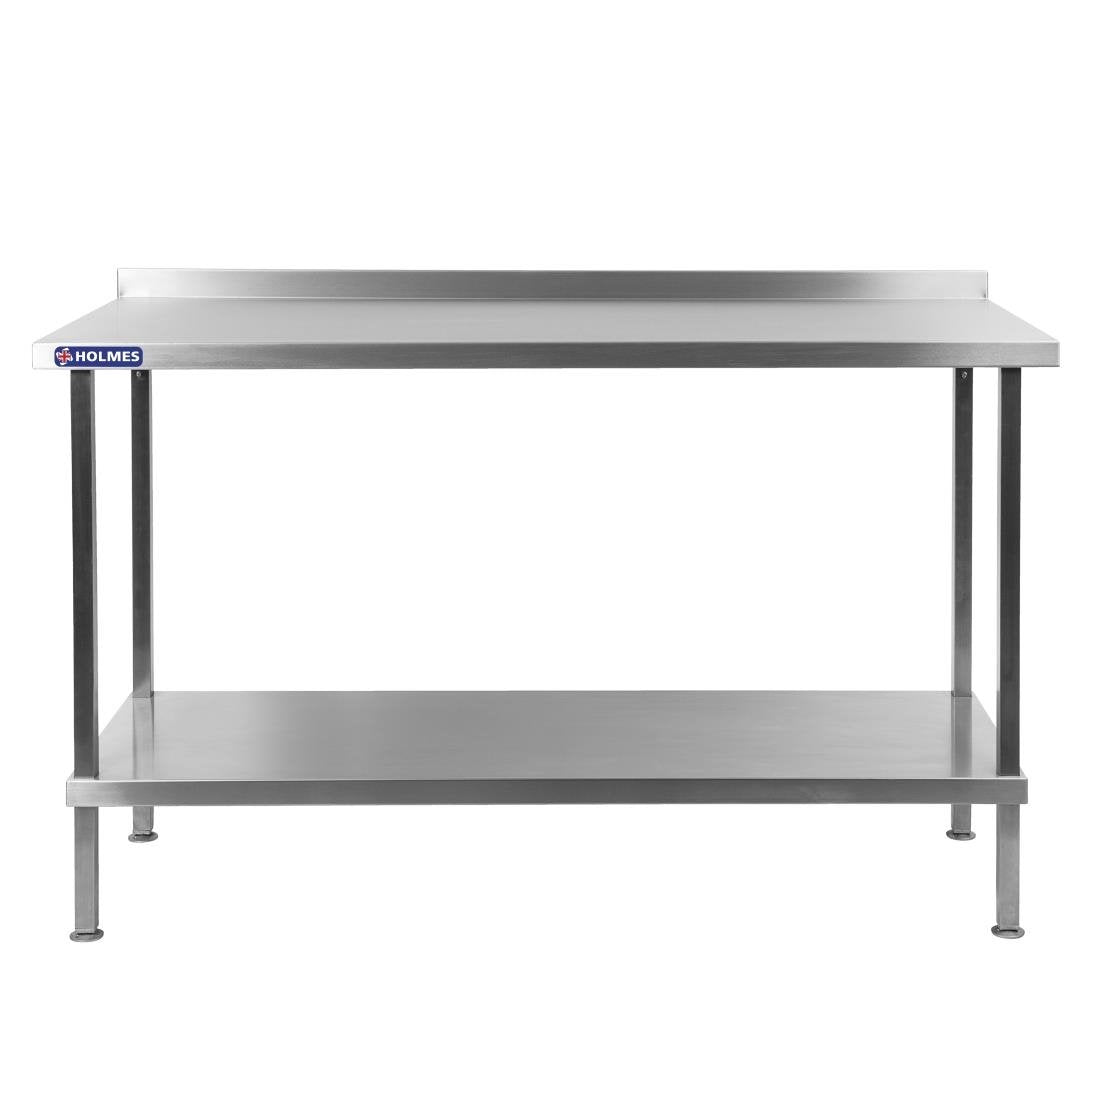 DR029 Holmes Stainless Steel Wall Table with Upstand 1200mm JD Catering Equipment Solutions Ltd